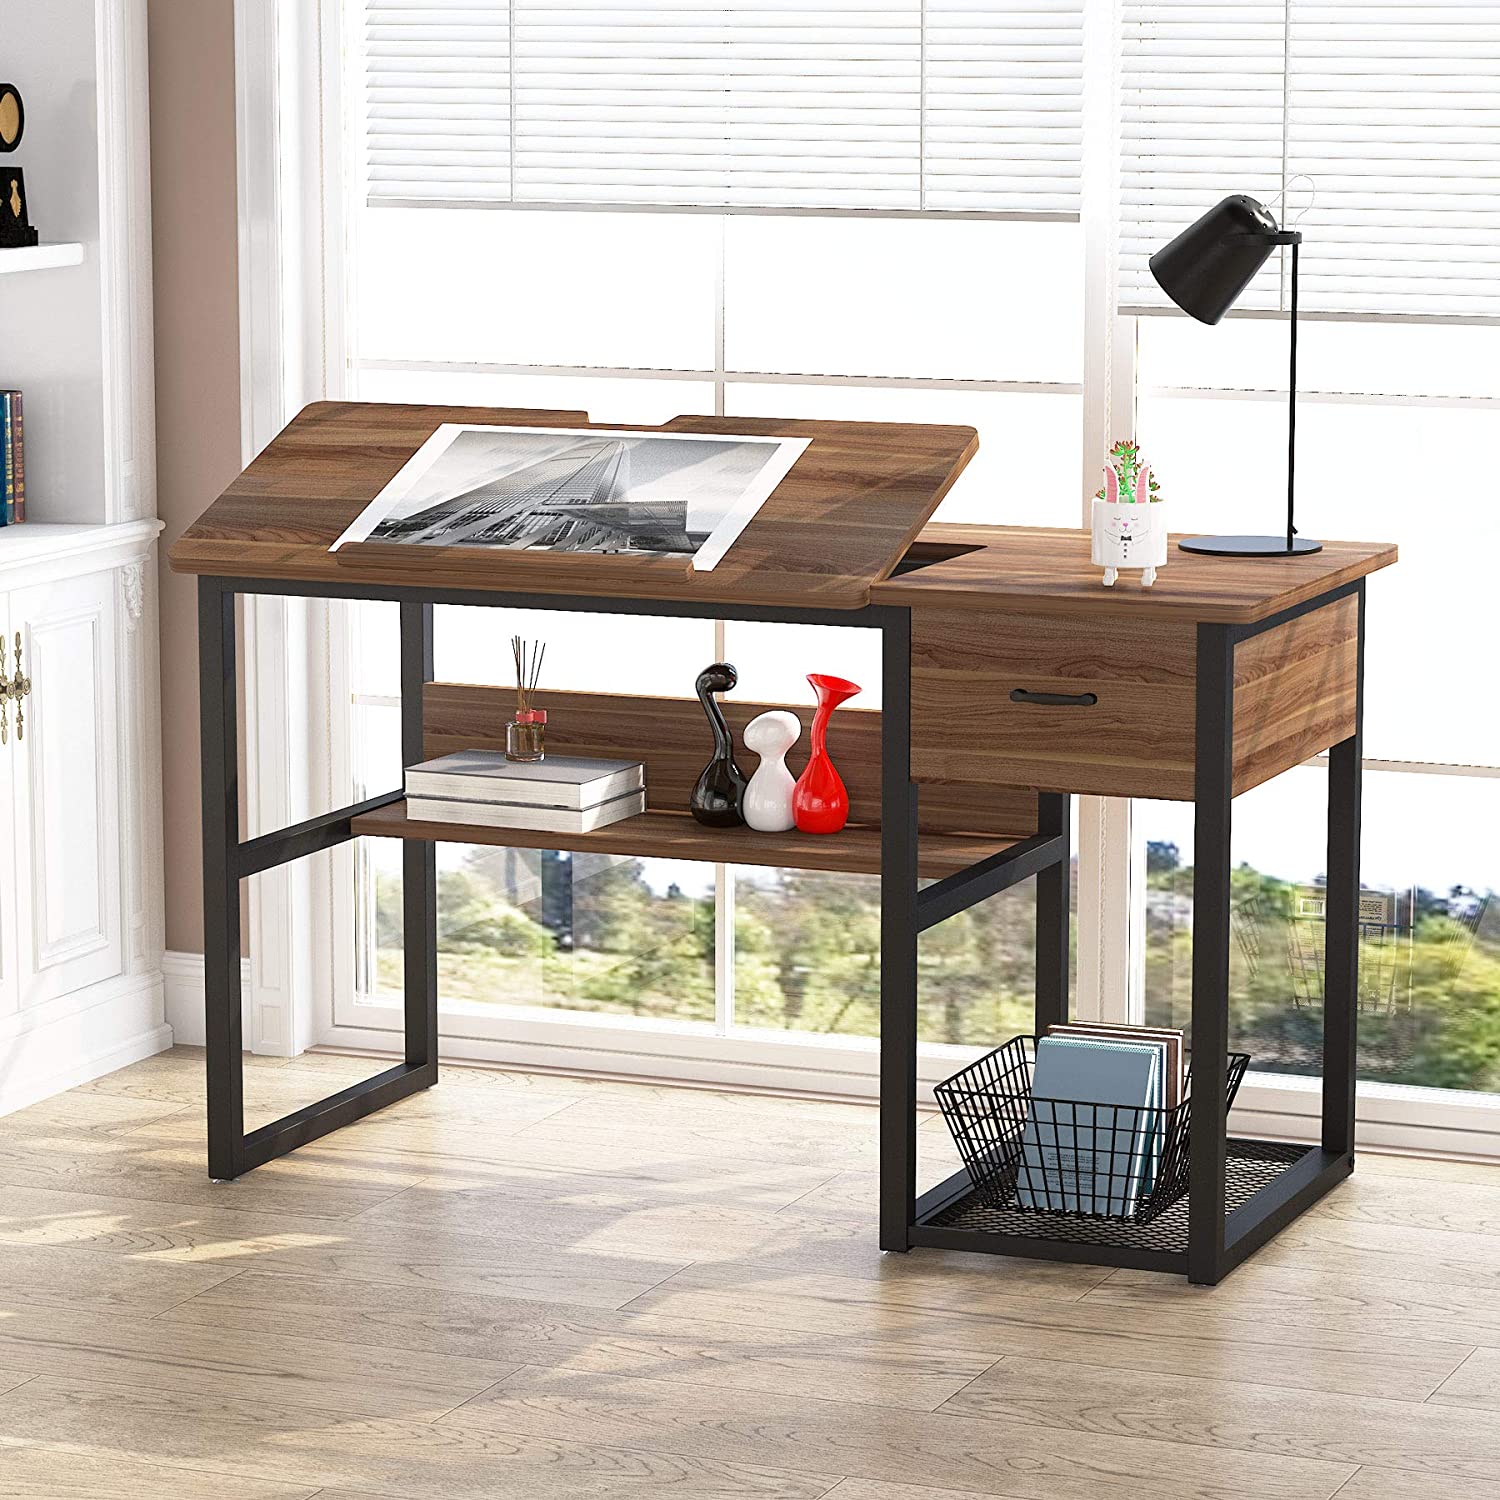 55 Ingenious Home Office Desk Ideas and Designs — RenoGuide